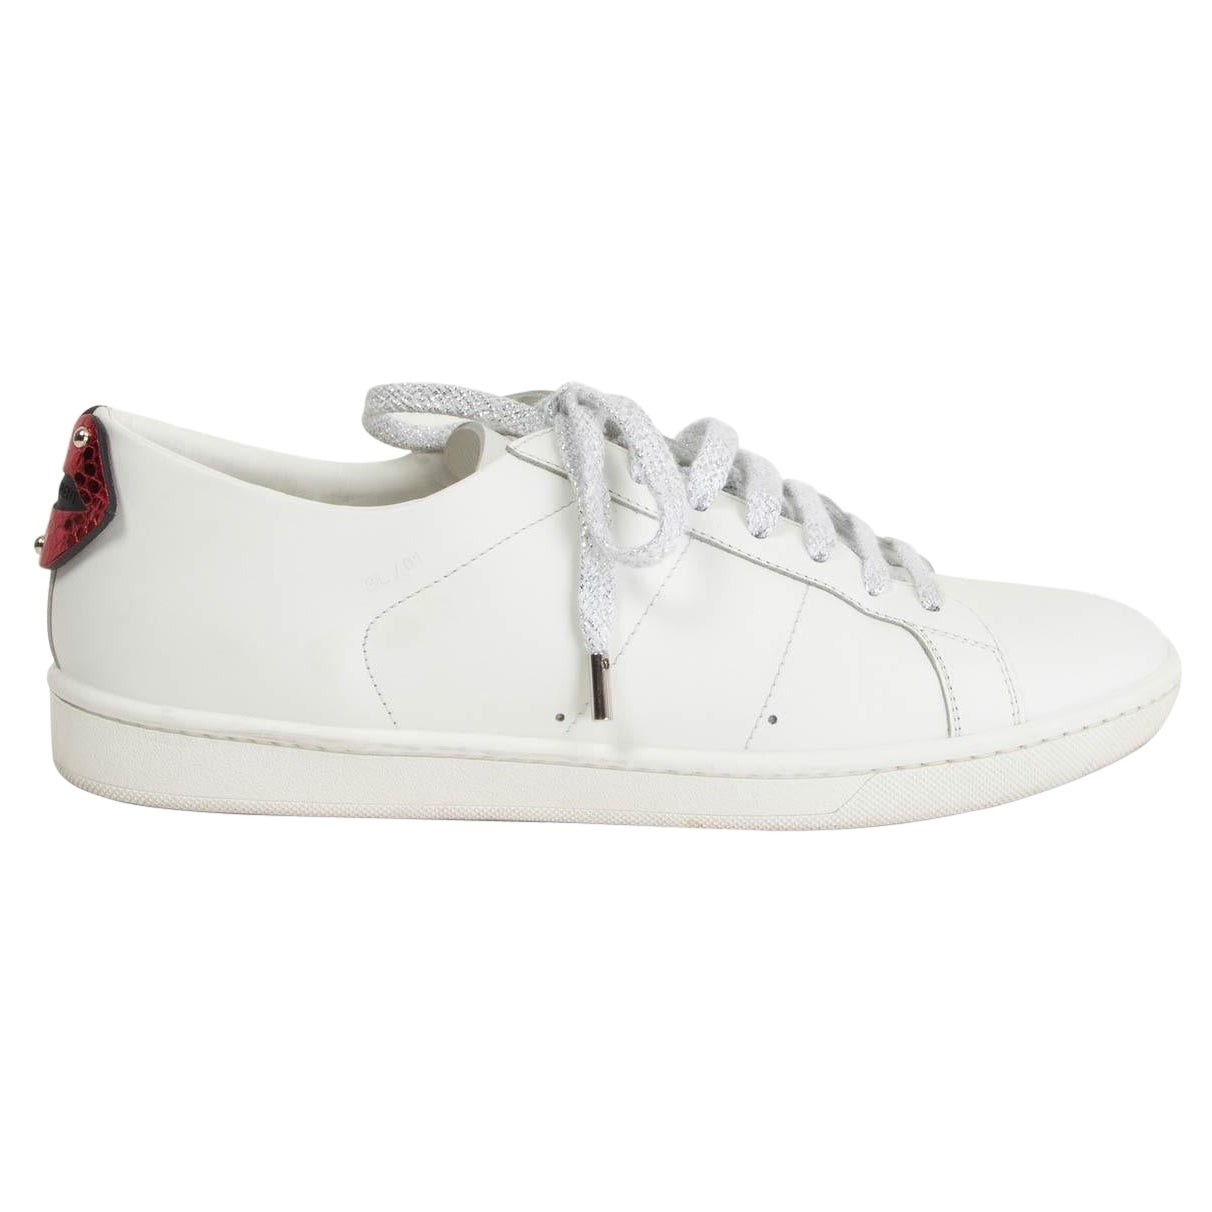 SAINT LAURENT white leather LIPS CLASSIC COURT Sneakers Shoes 39.5 For Sale